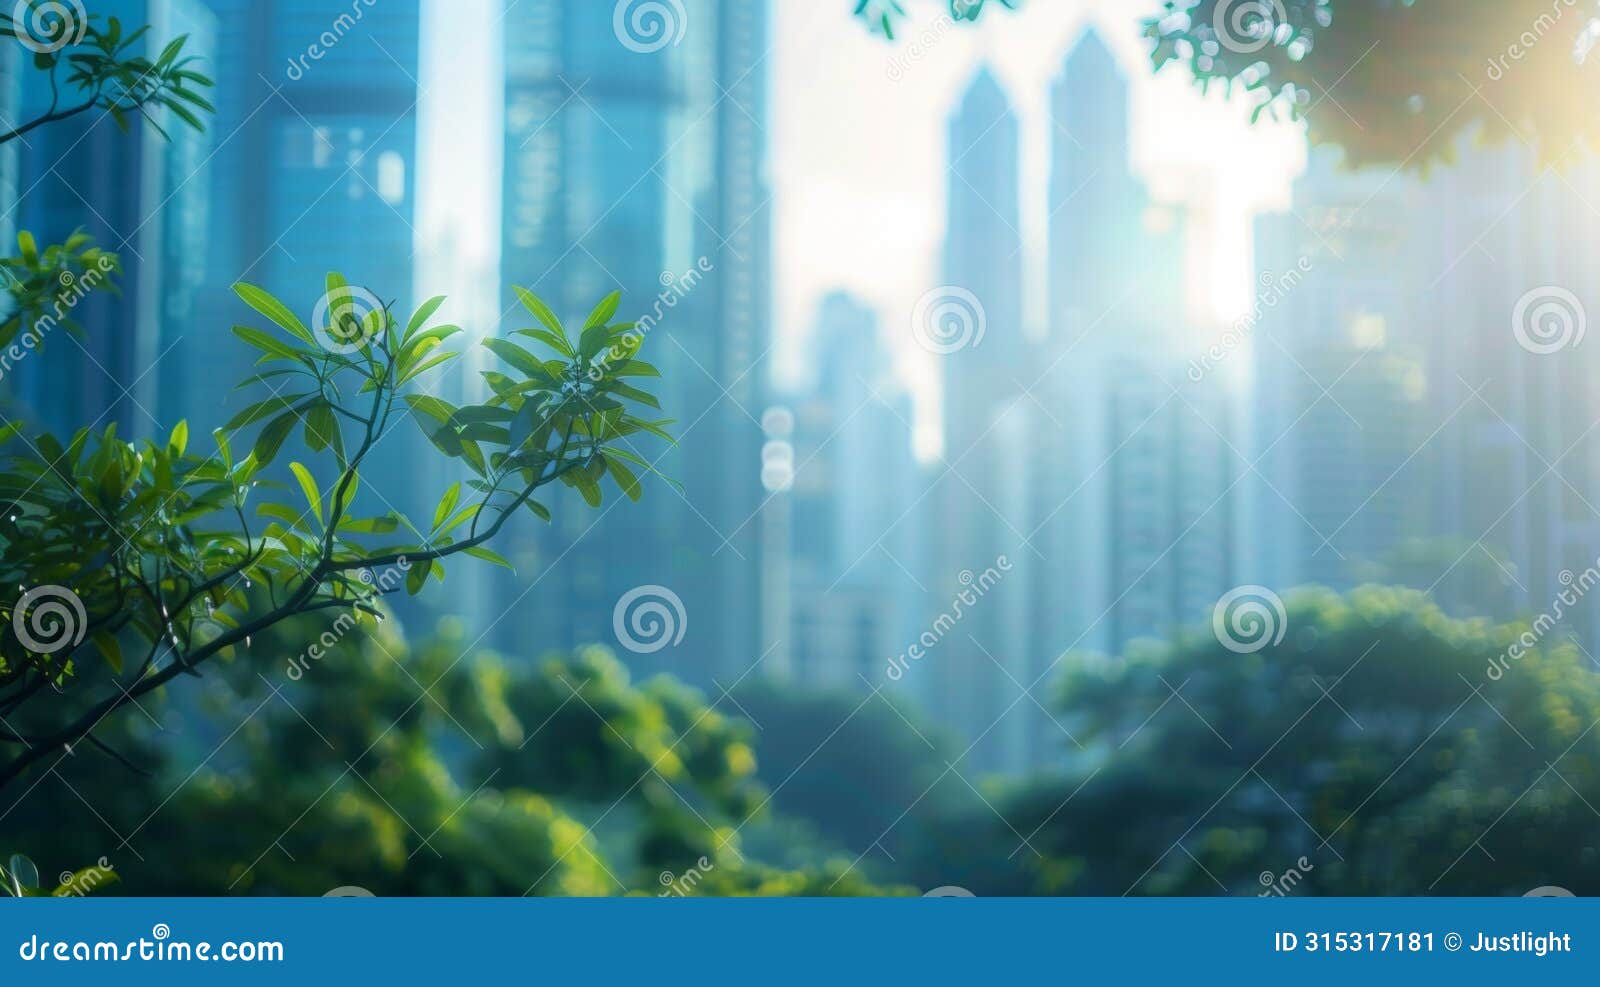 softly blurred cityscape in the backdrop resembling a dreamy utopian city where advanced technology and nature coexist